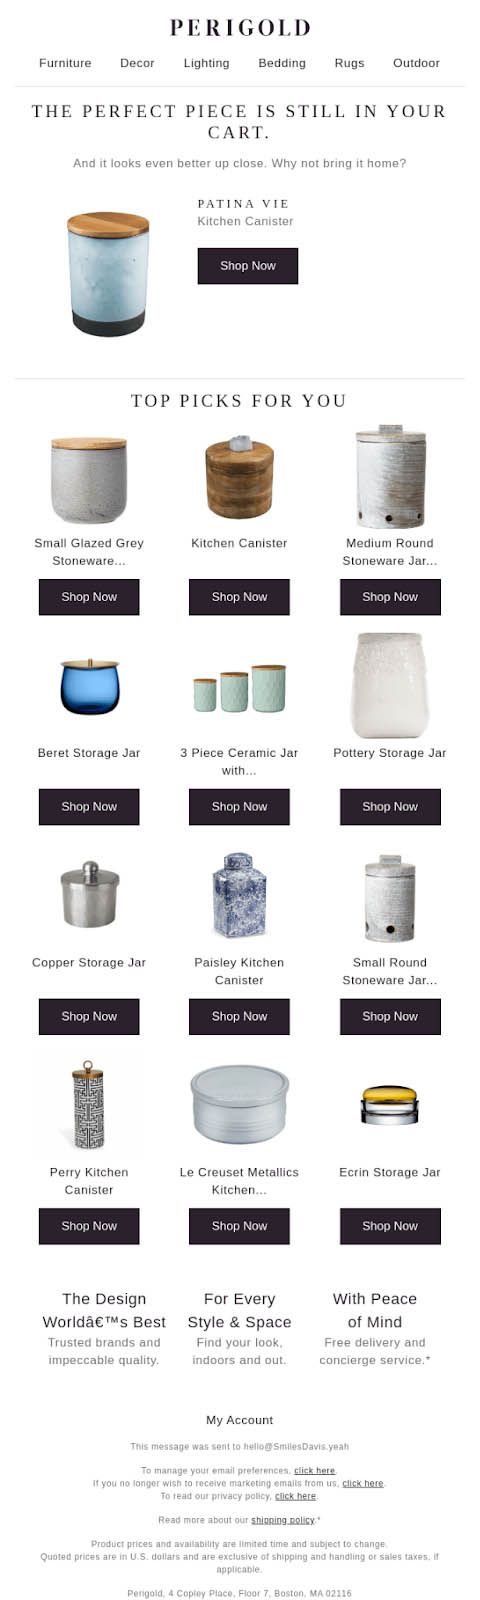 Perigold home goods featured in its cart abandonment email with "Shop Now" buttons for each item